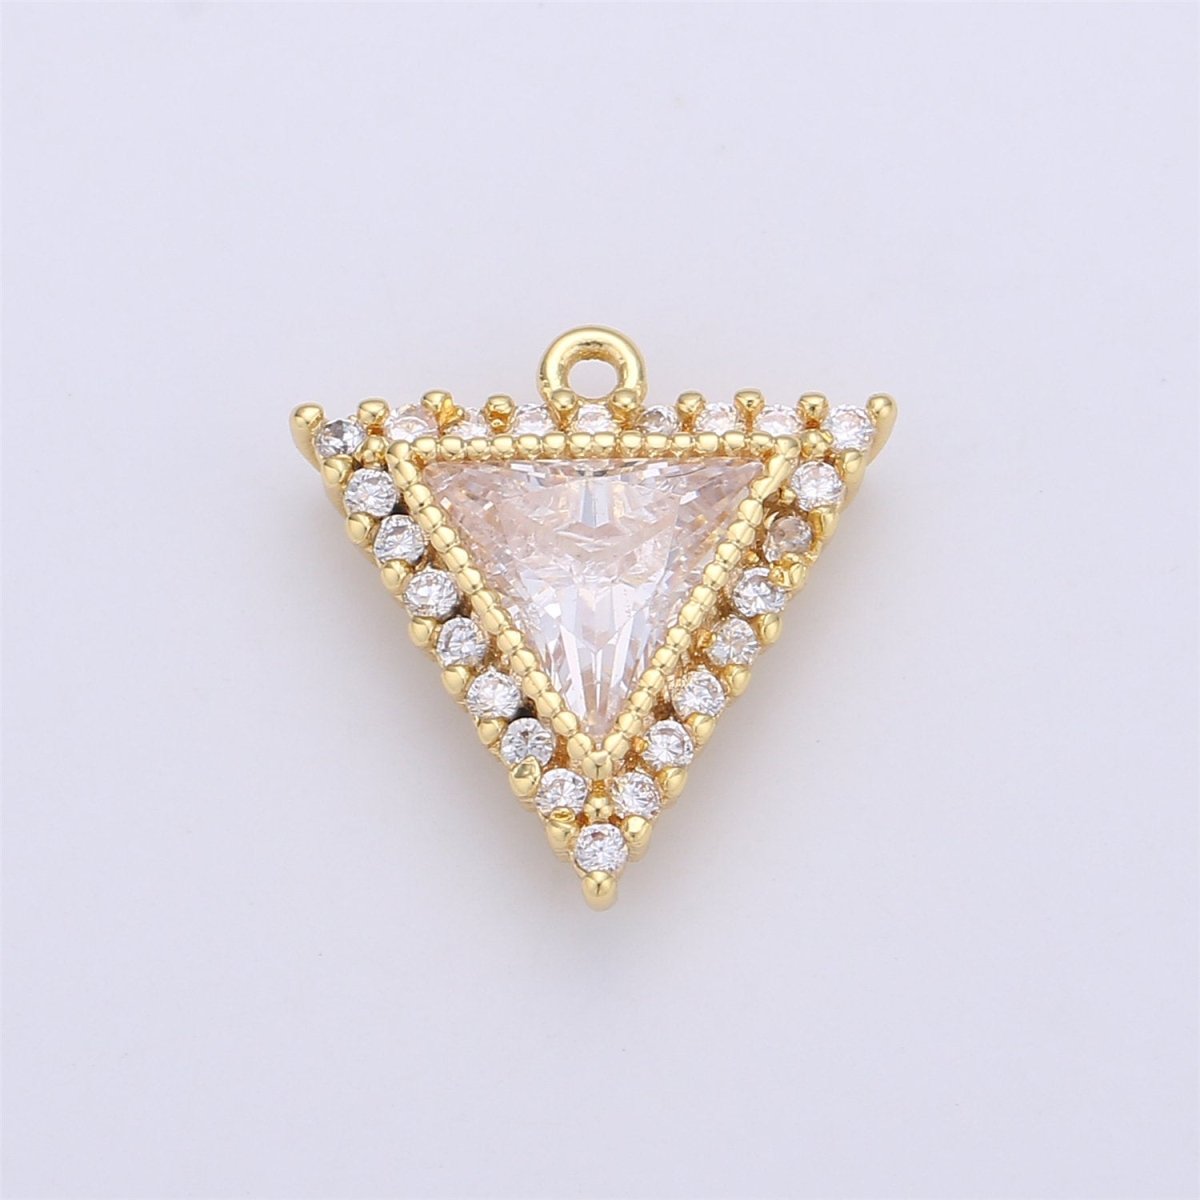 Dainty 18K Gold Filled Triangle Charm Micro Pave Pyramid Cubic Charm Bracelet Necklace Earring Charm Component Jewelry Making Supply C-650 - DLUXCA